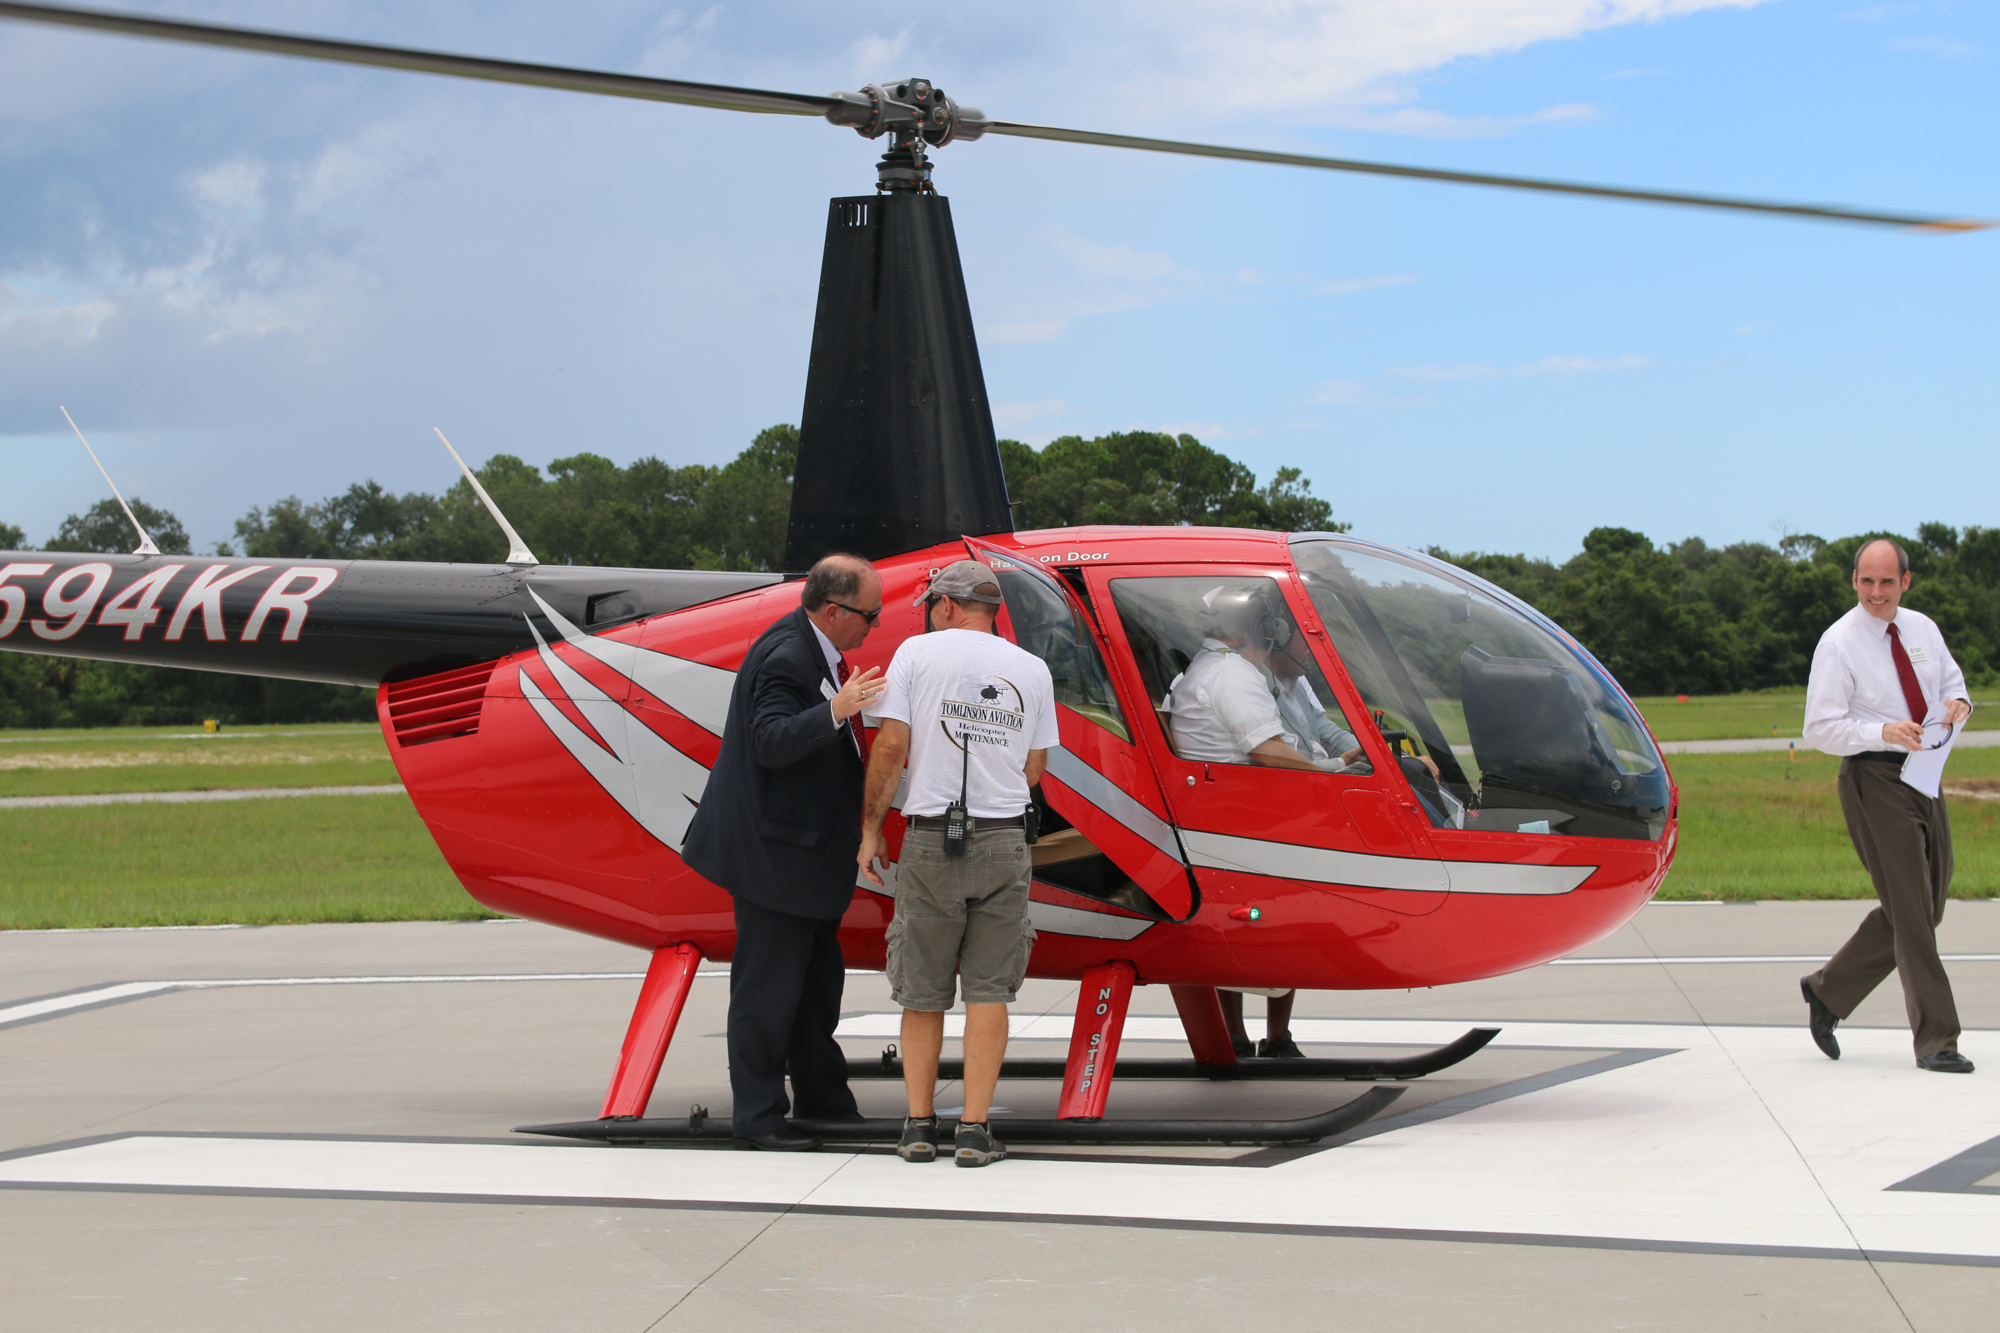 Mayor Bill Partington exits the helicopter at the conclusion of the tour. Photo by Jarleene Almenas